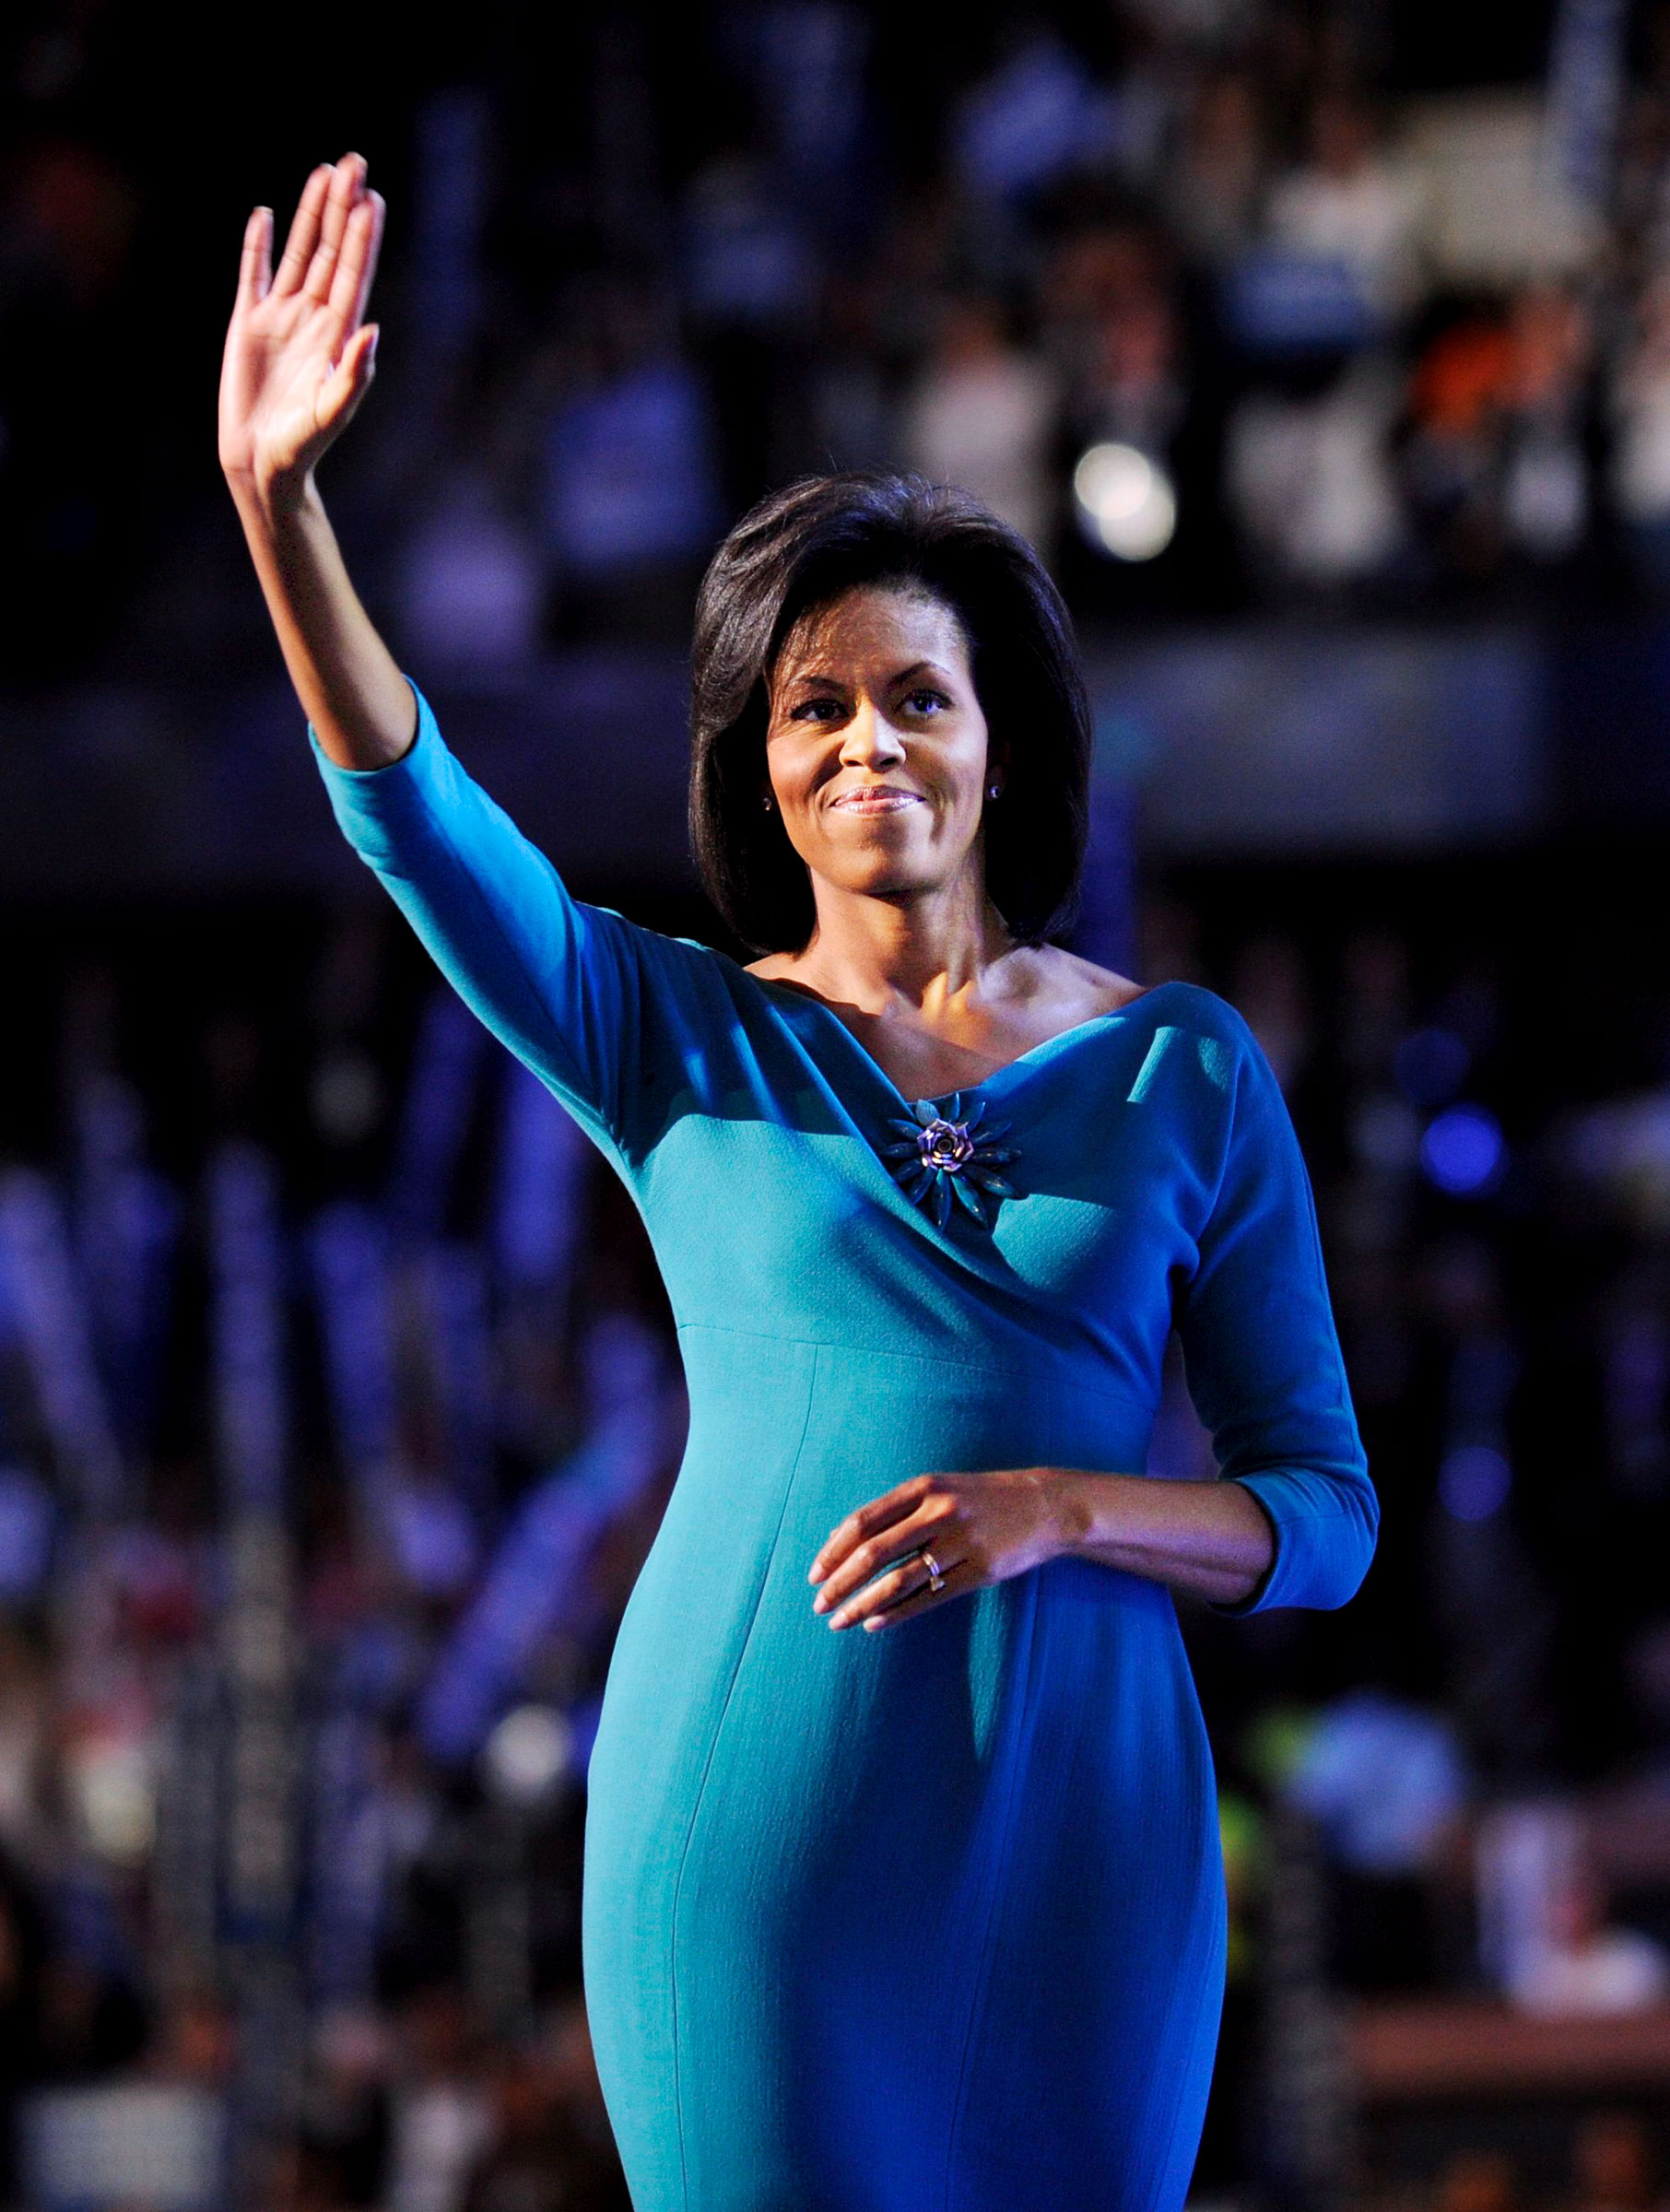 Michelle Obama waves after addressing the 2008 Democratic National Convention in Denver, August 25, 2008. (Shawn Thew—EPA/Shutterstock)